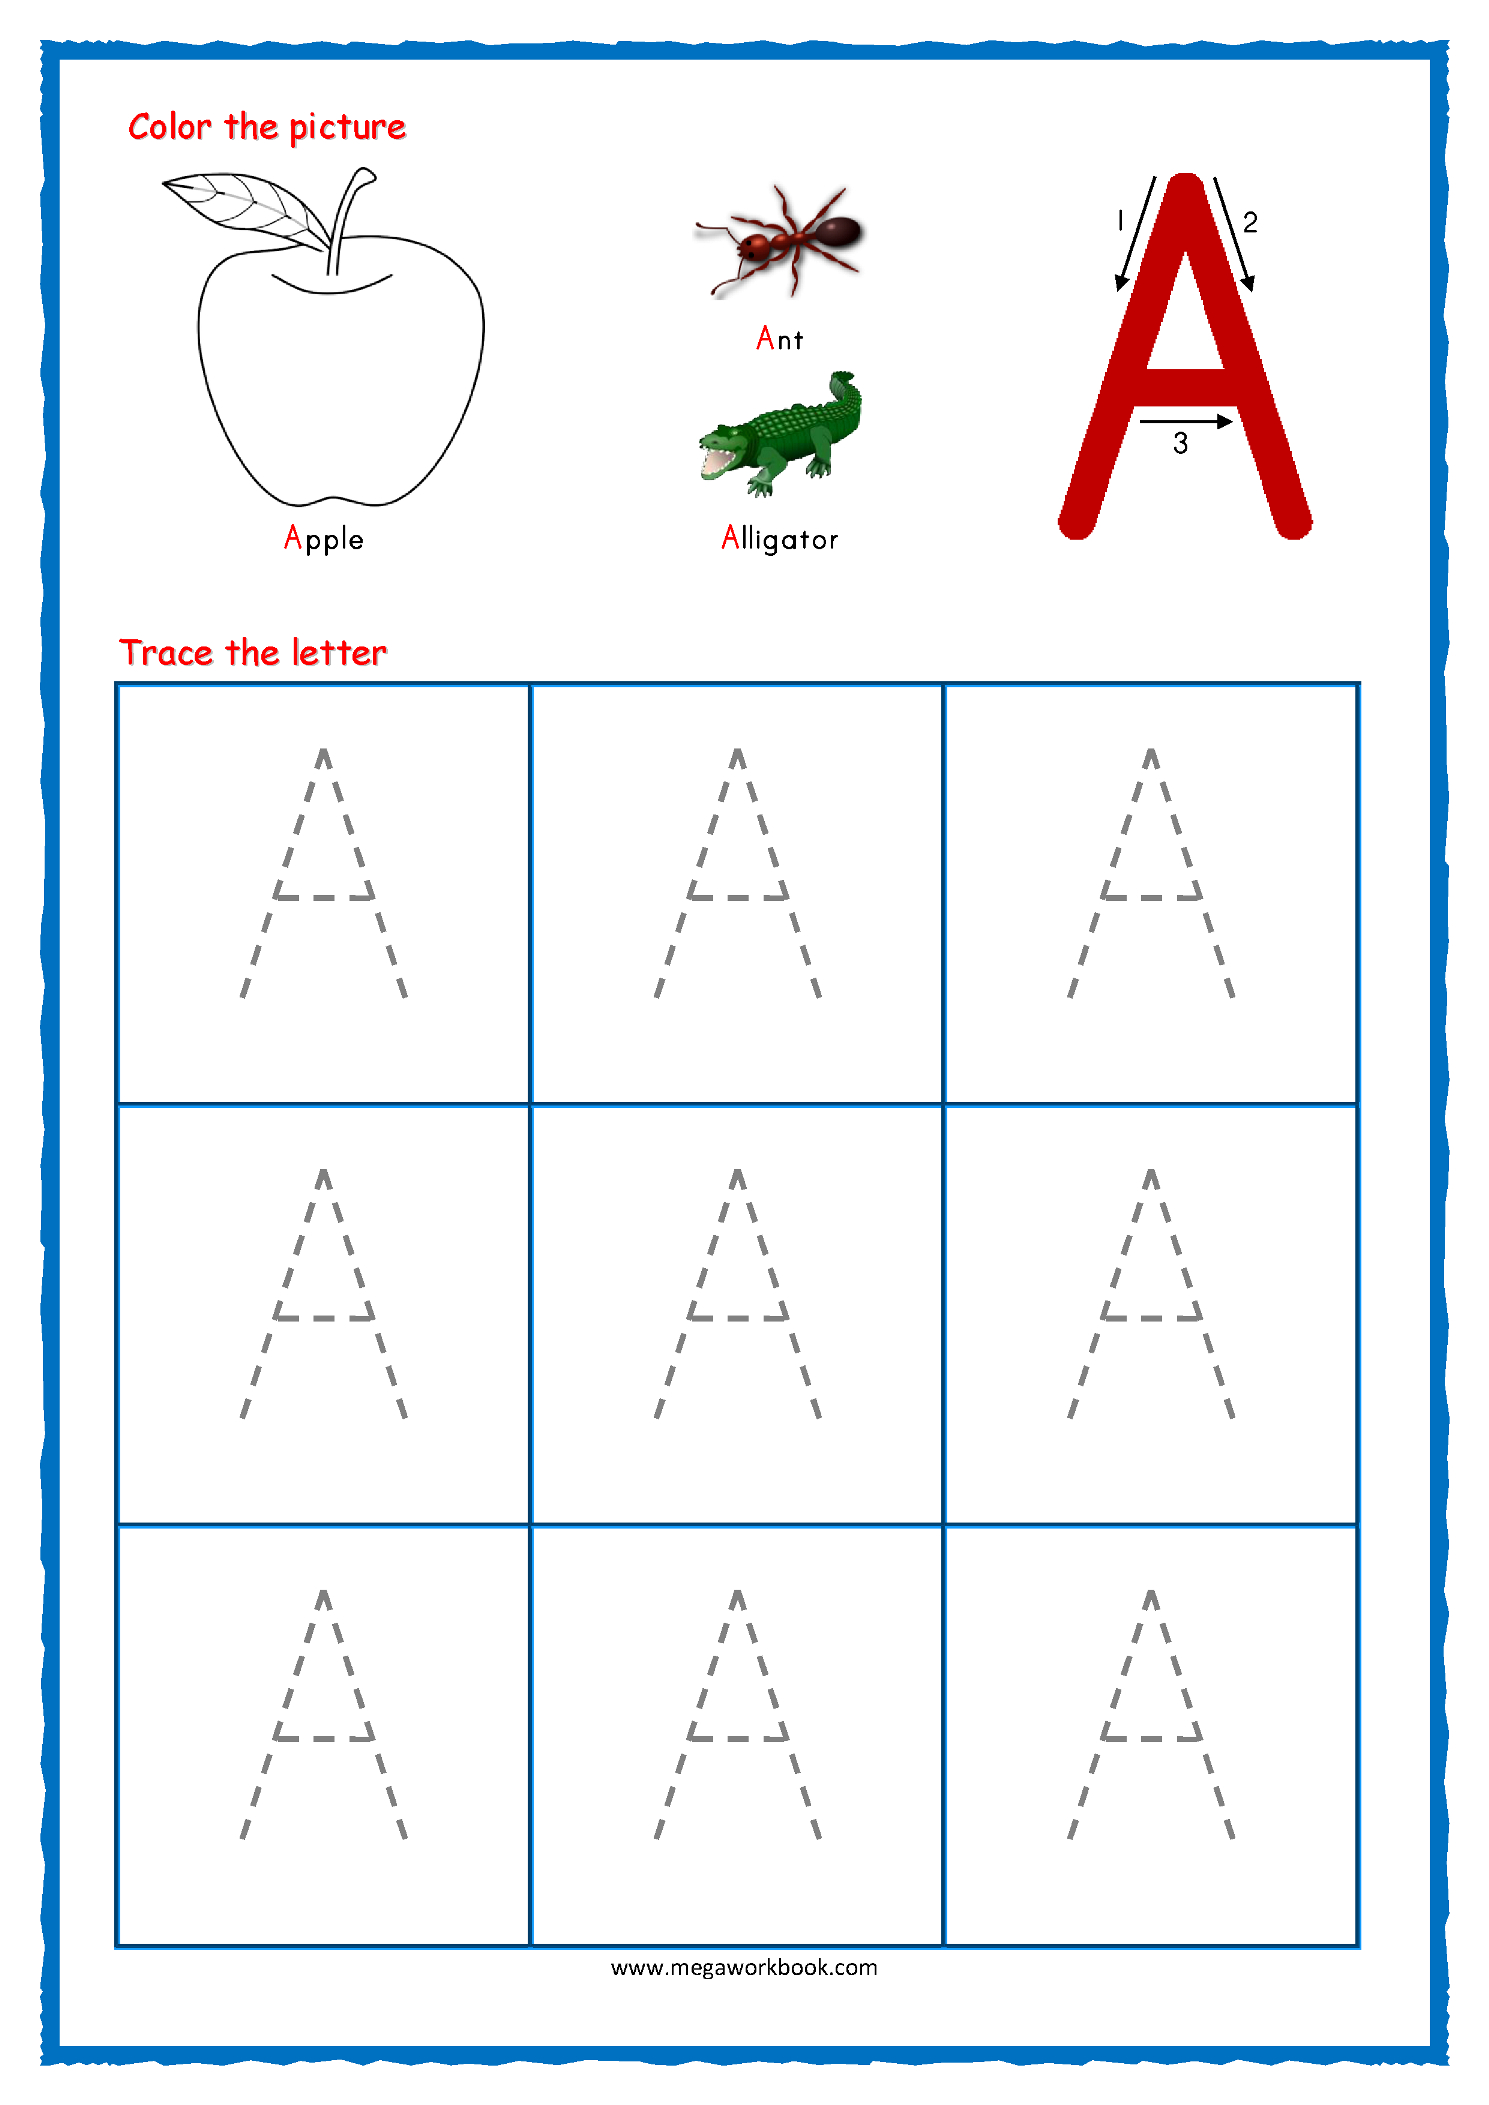 Tracing Letters - Alphabet Tracing - Capital Letters in Tracing Letters Worksheets Preschool